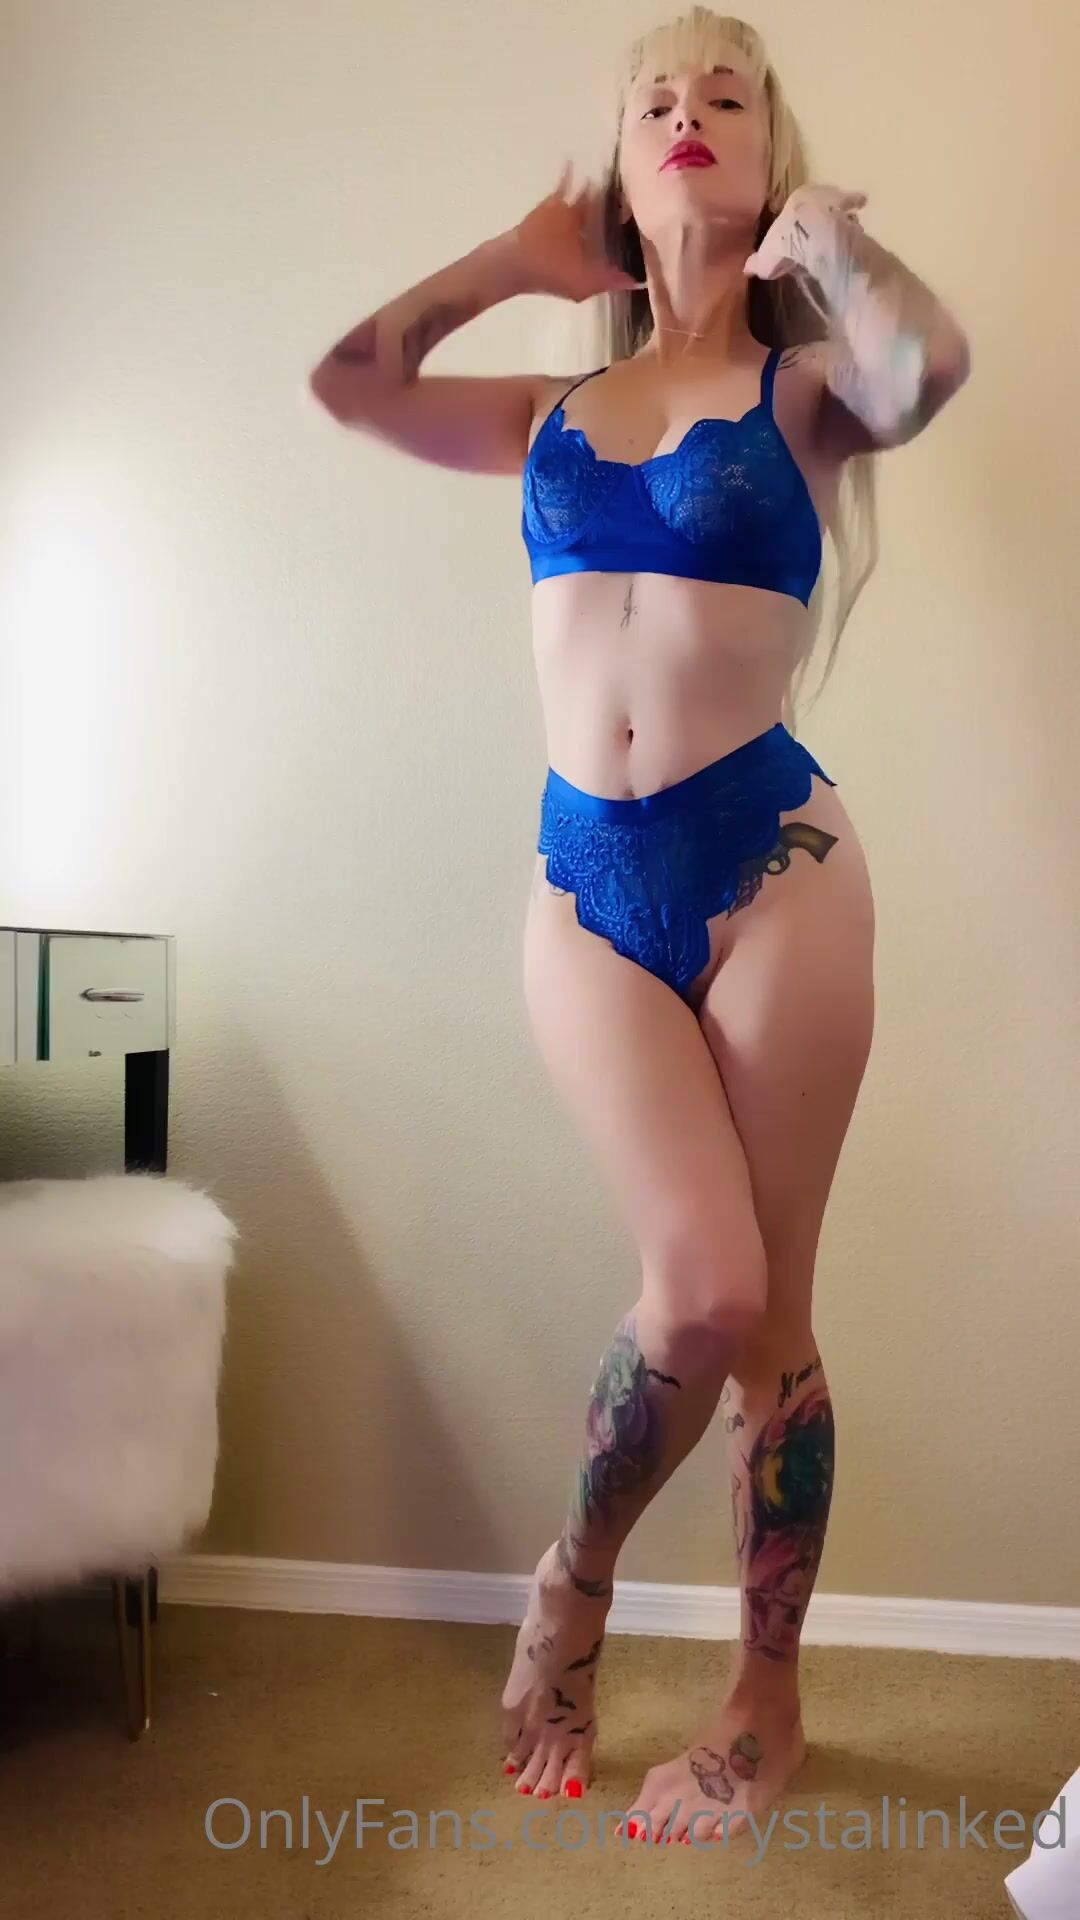 Blue Picture Only Sexy - Crystalinked trying on my new royal blue lingerie had so much fun filming  this video. do